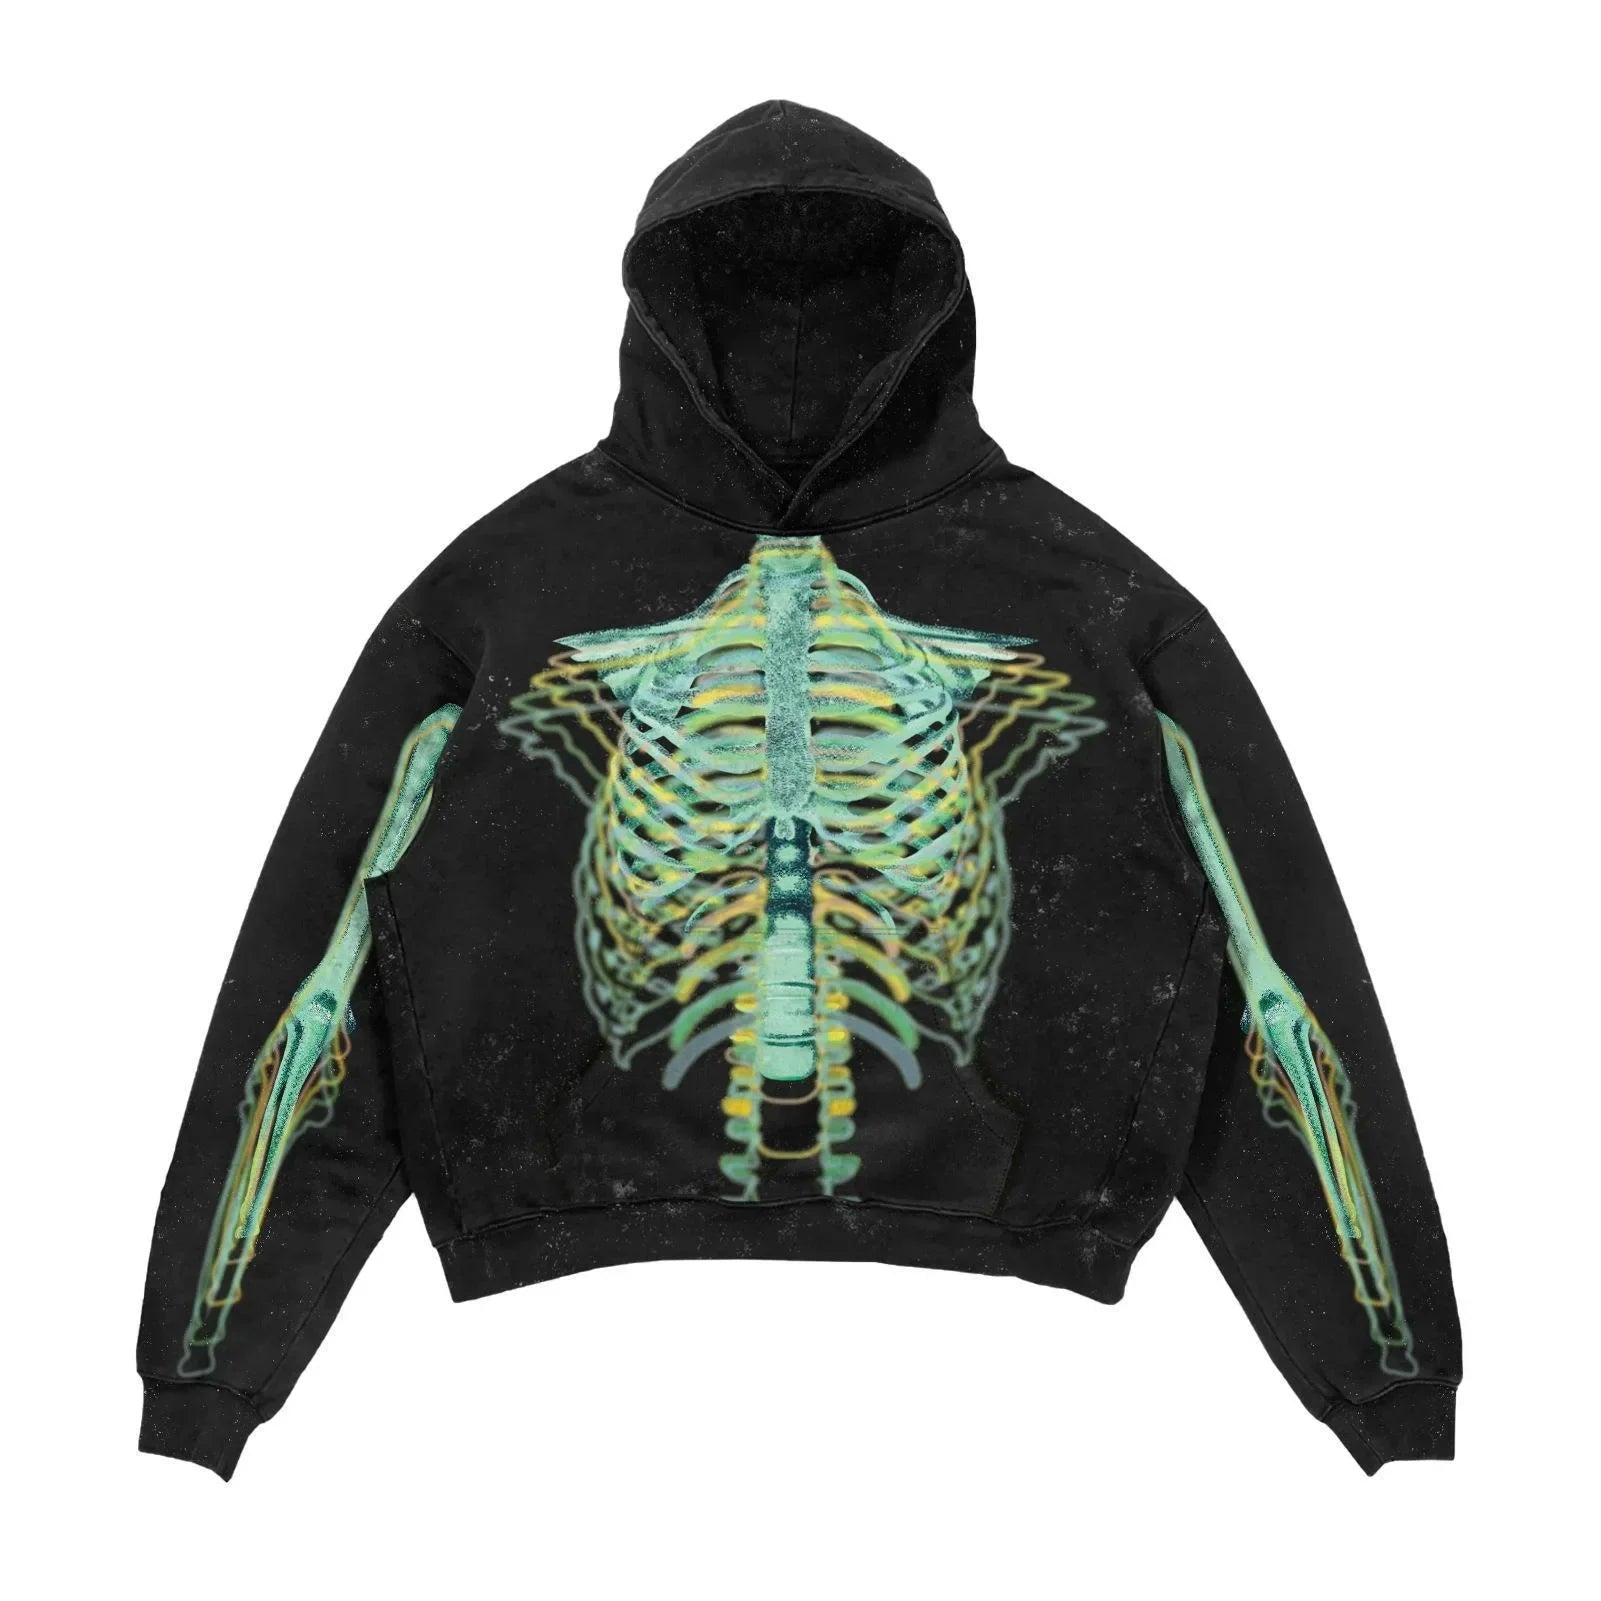 A Maramalive™ Explosions Printed Skull Y2K Retro Hooded Sweater Coat Street Style Gothic Casual Fashion Hooded Sweater Men's Female featuring a 3D skeletal rib cage and arms design in green and yellow tones, perfect for adding a touch of punk style to your wardrobe across all four seasons.